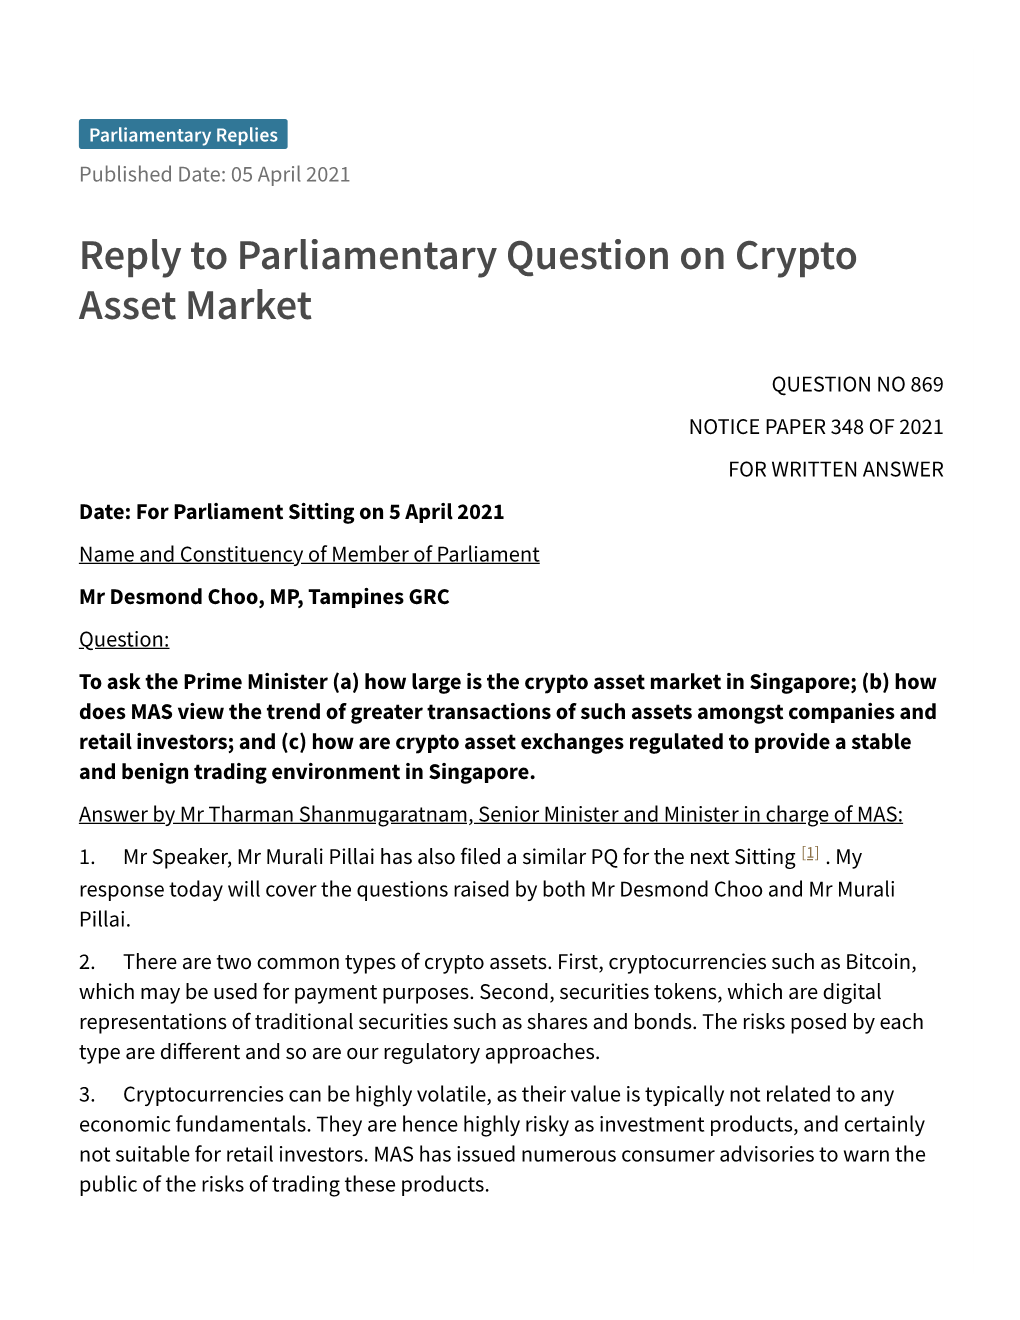 Reply to Parliamentary Question on Crypto Asset Market